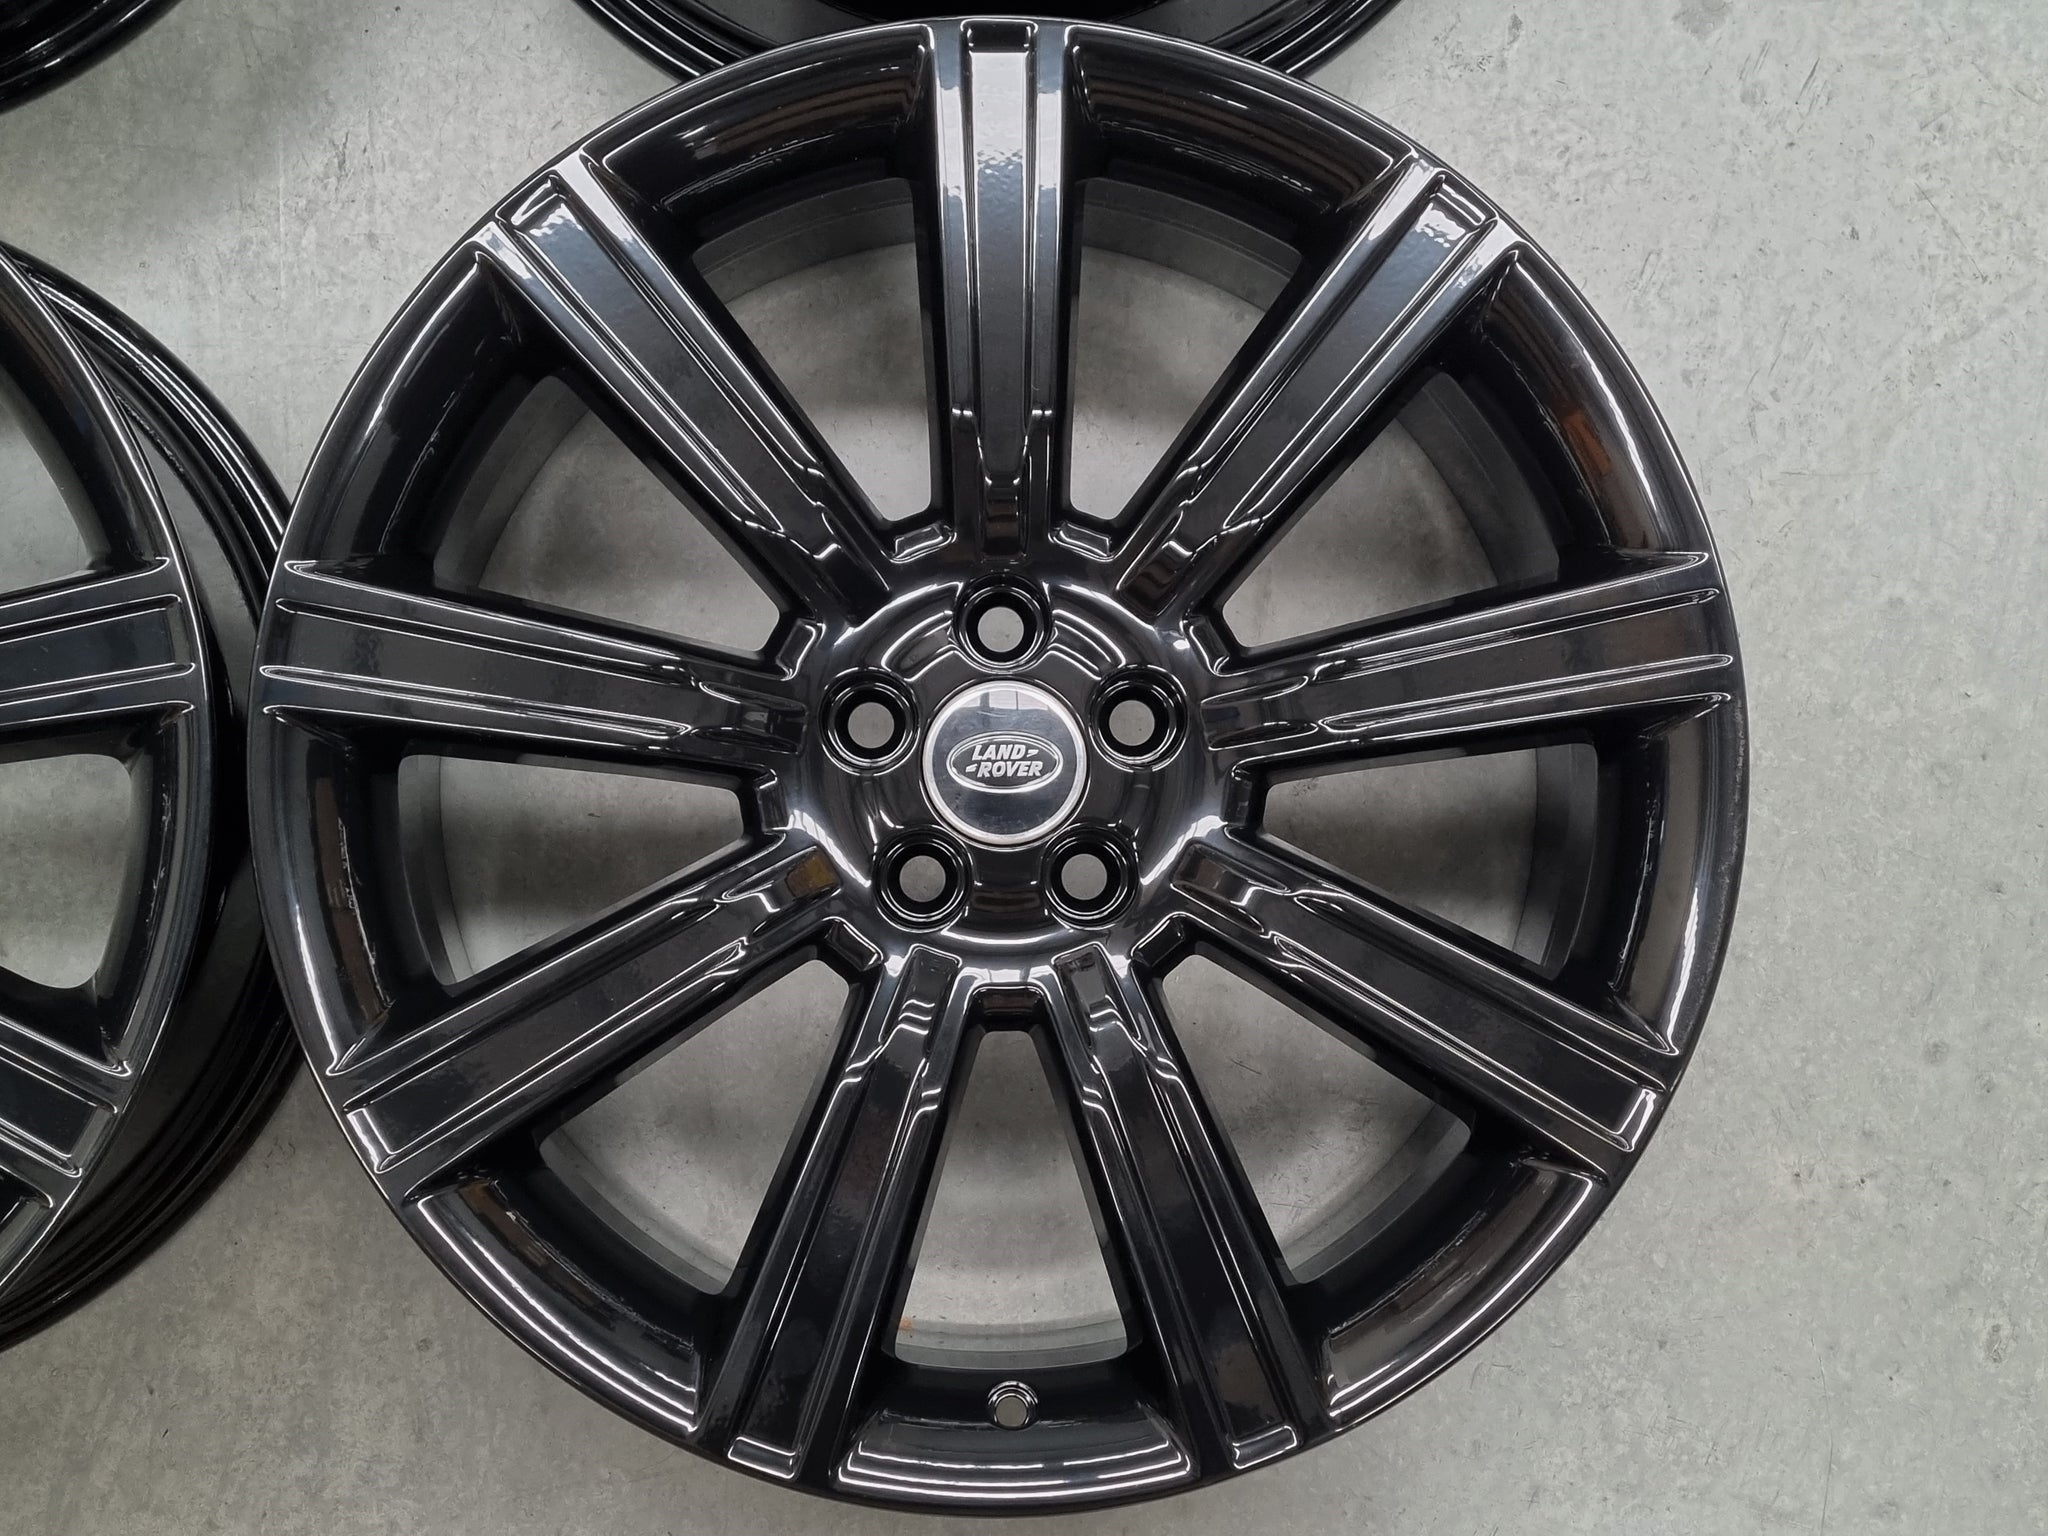 Load image into Gallery viewer, Genuine Range Rover Evoque Forged Black 20 Inch Alloy Wheels Set of 4
